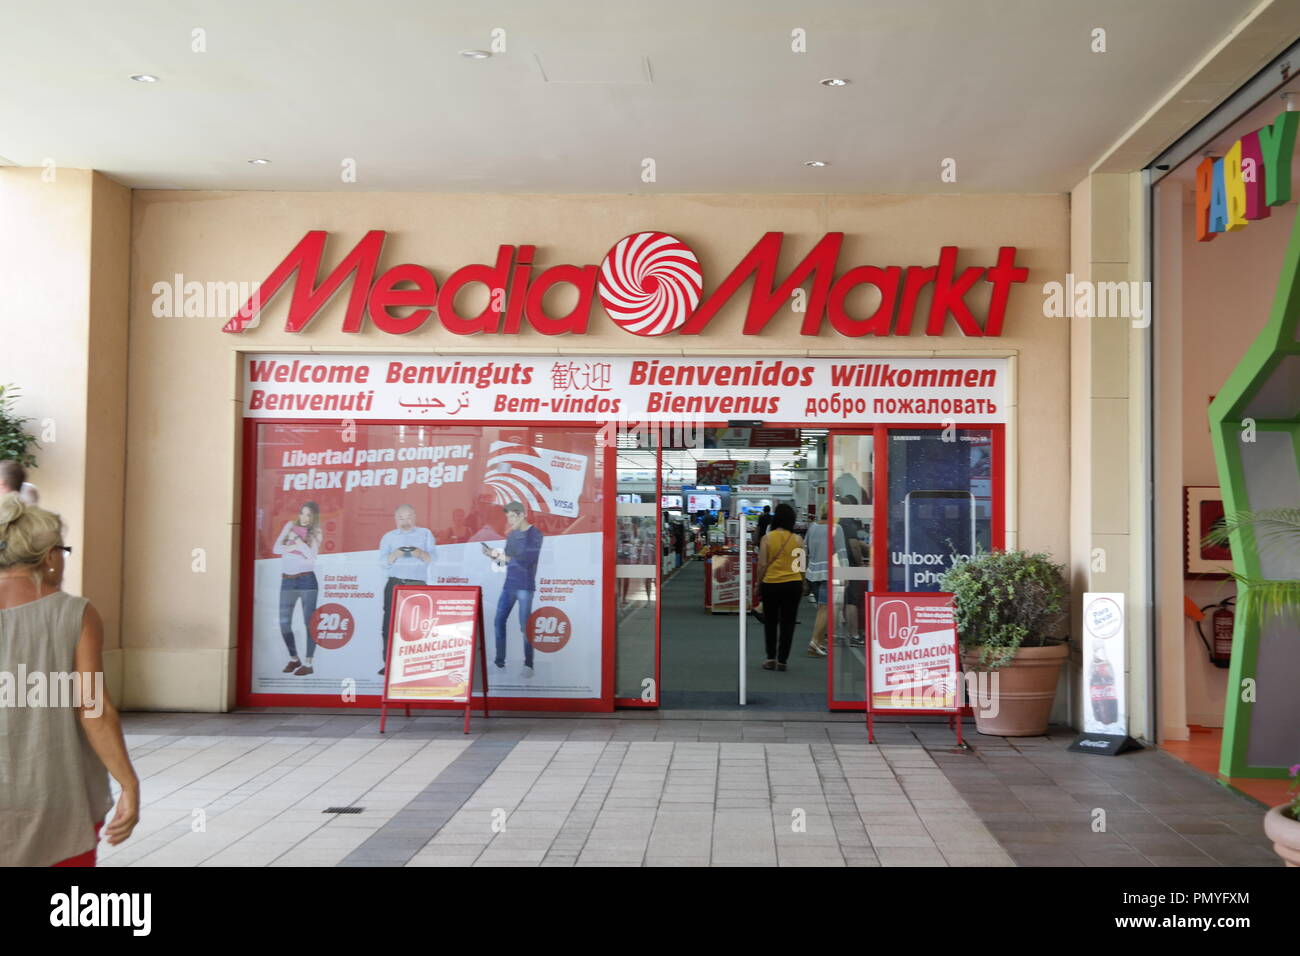 Mediamarkt spain hi-res stock photography and images - Alamy